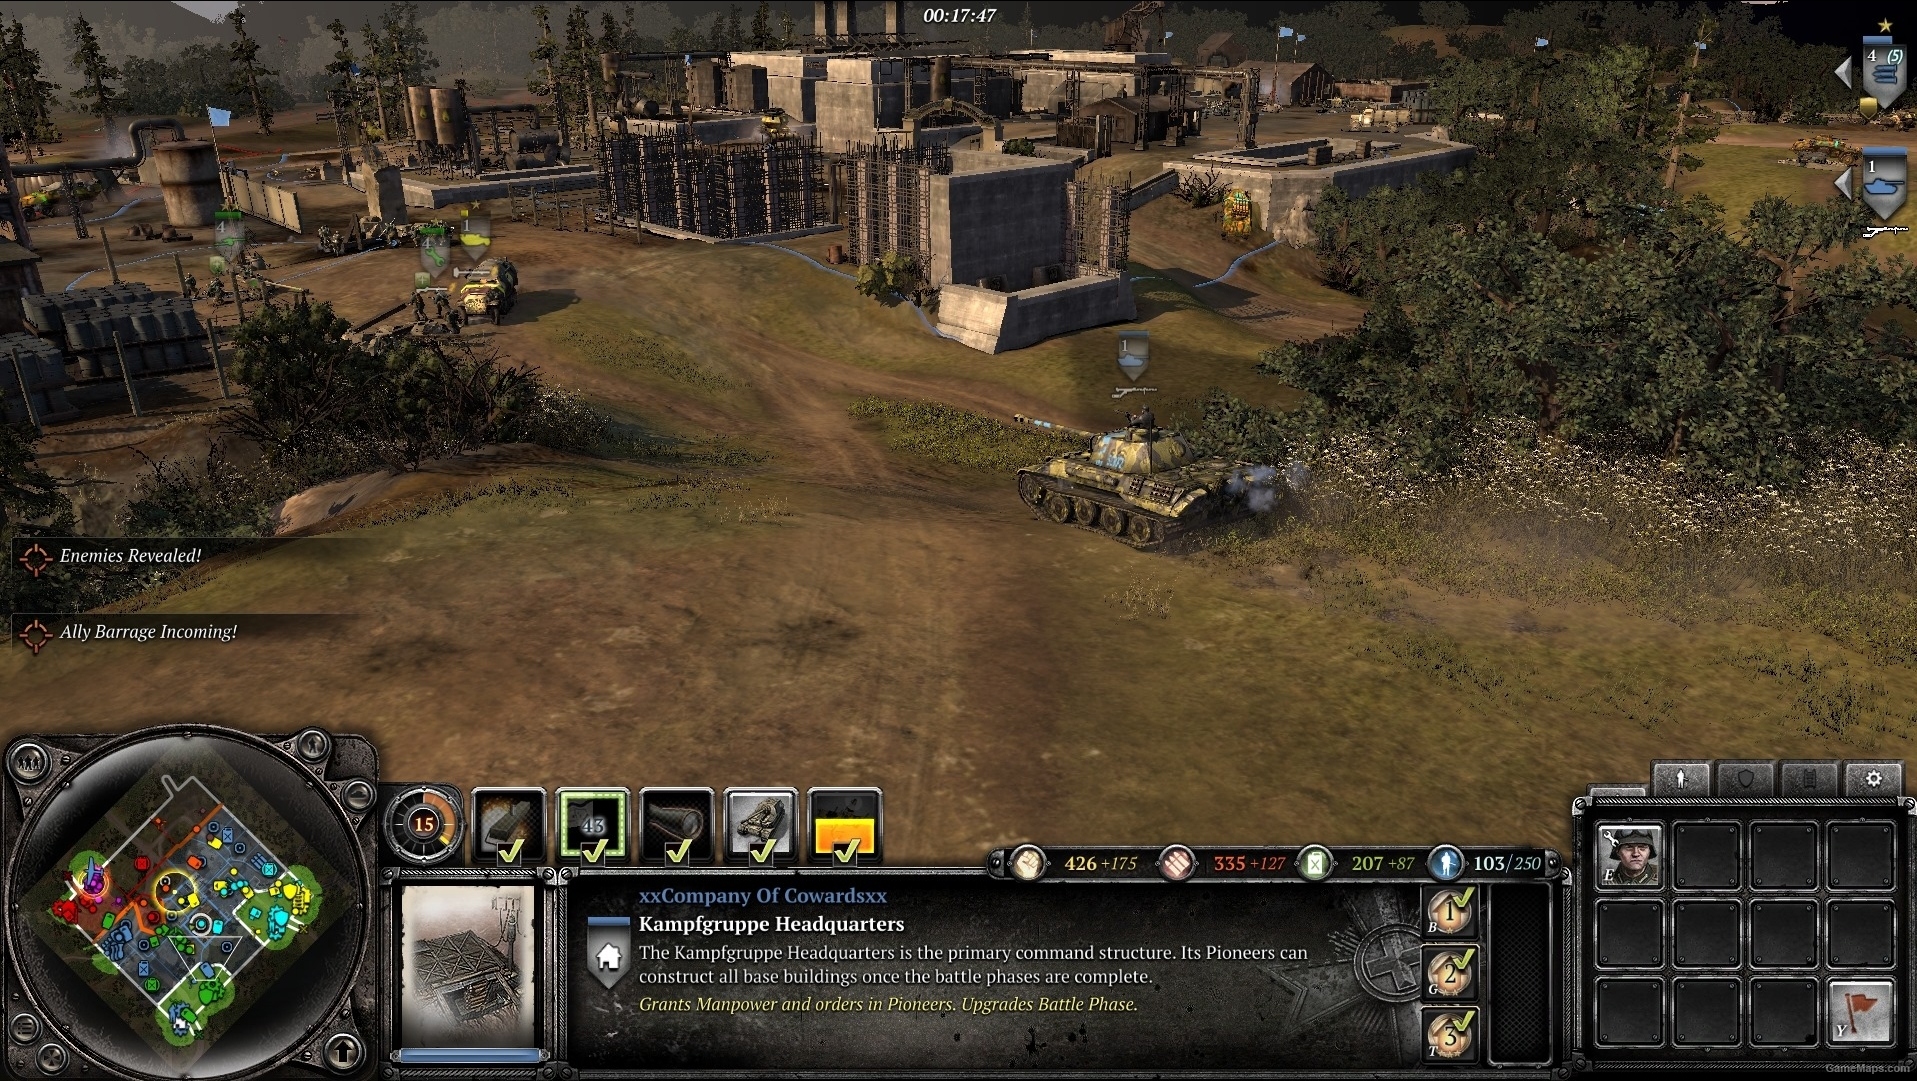 company of heroes 2 ardennes assault